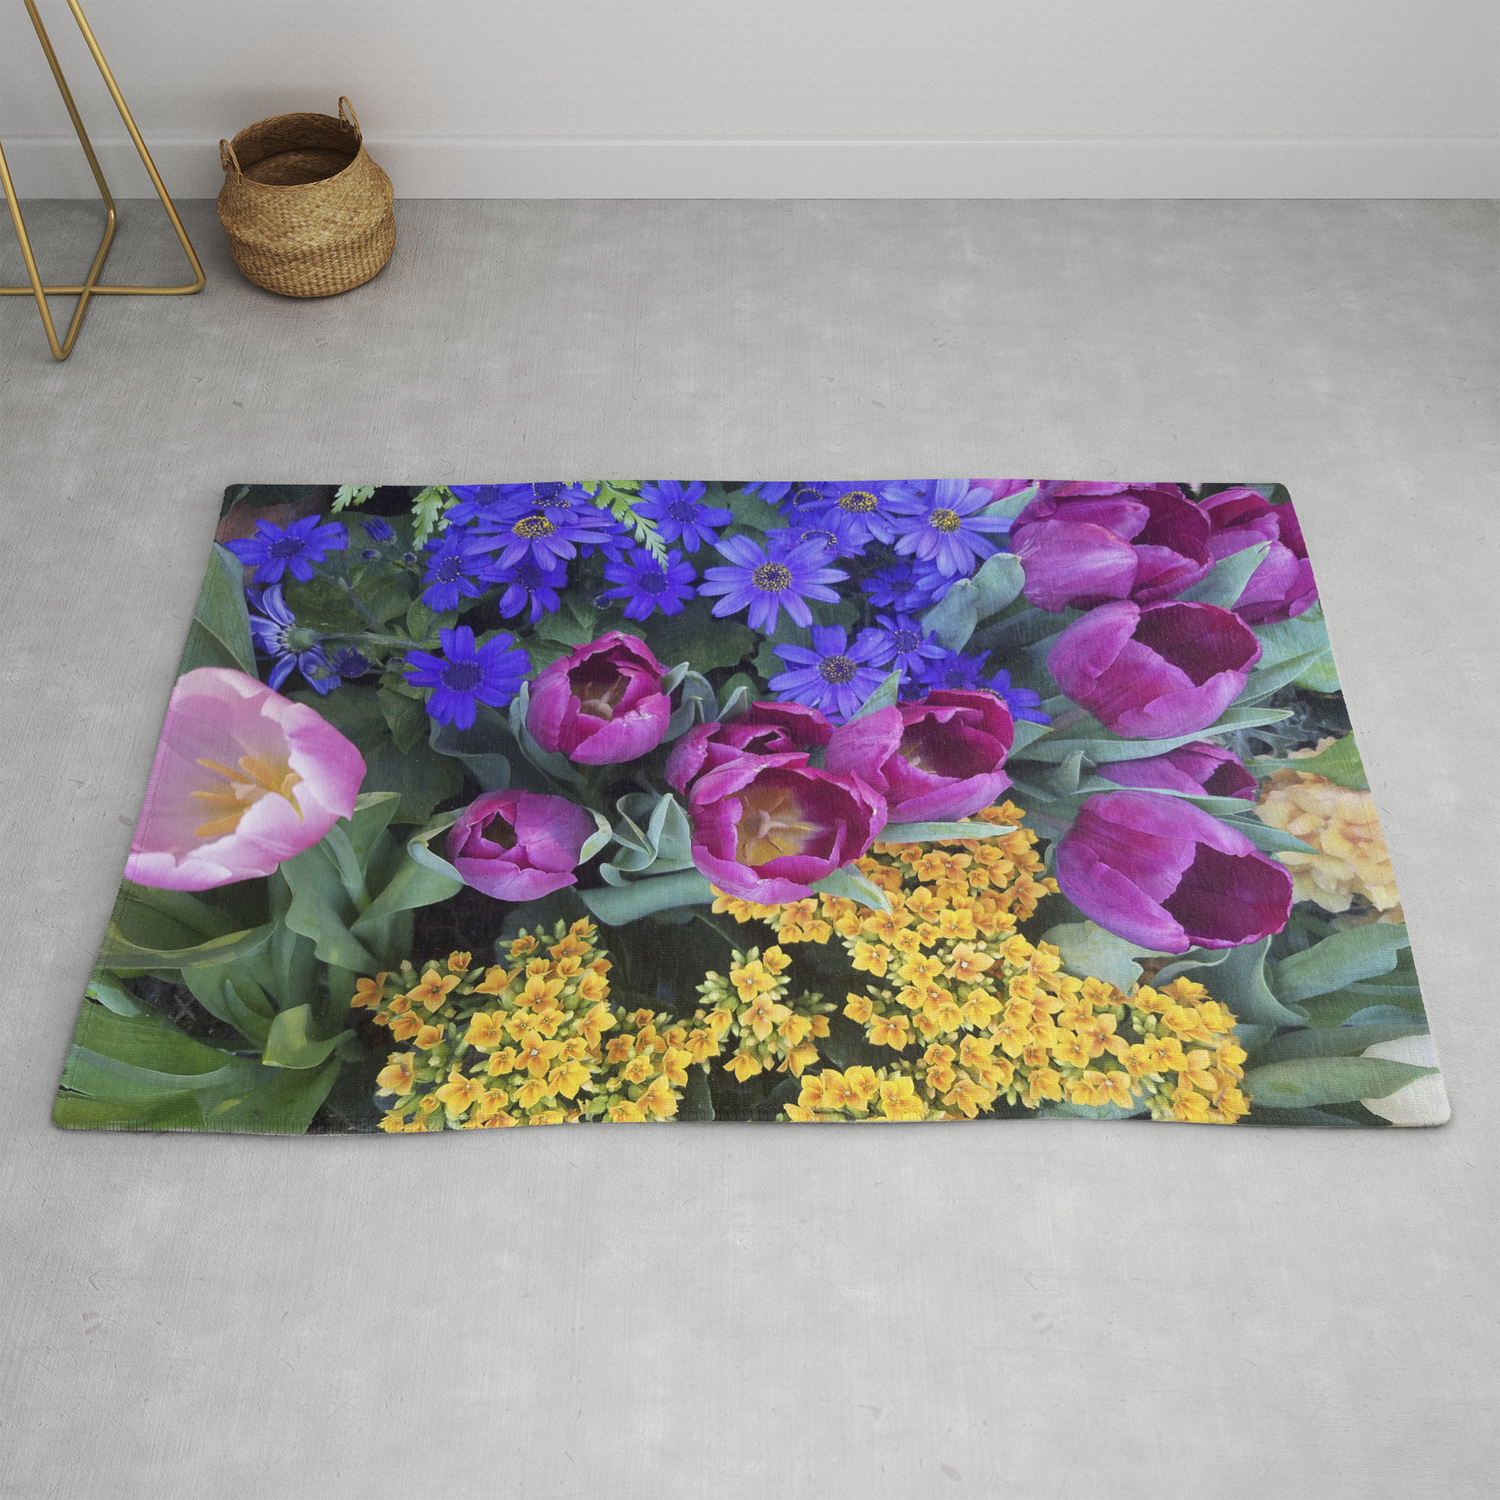 floral spectacular: blue, plum and gold - olbrich botanical gardens spring  flower show, madison, wi rug by rvjdesigns